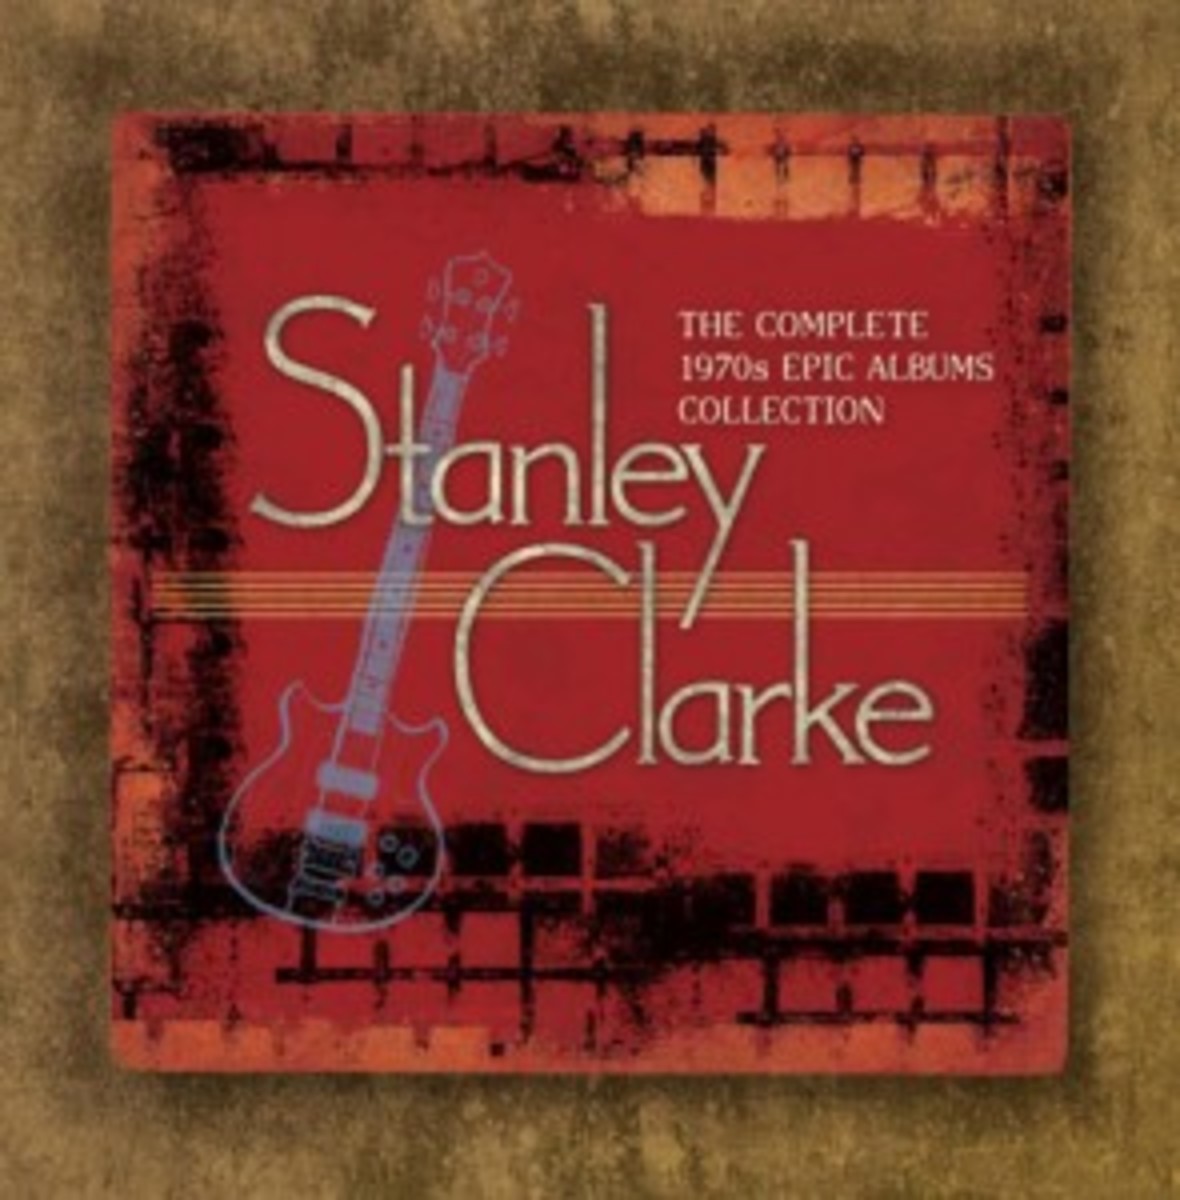 Stanley Clarke The Complete 1970s Epic Records Album Collection